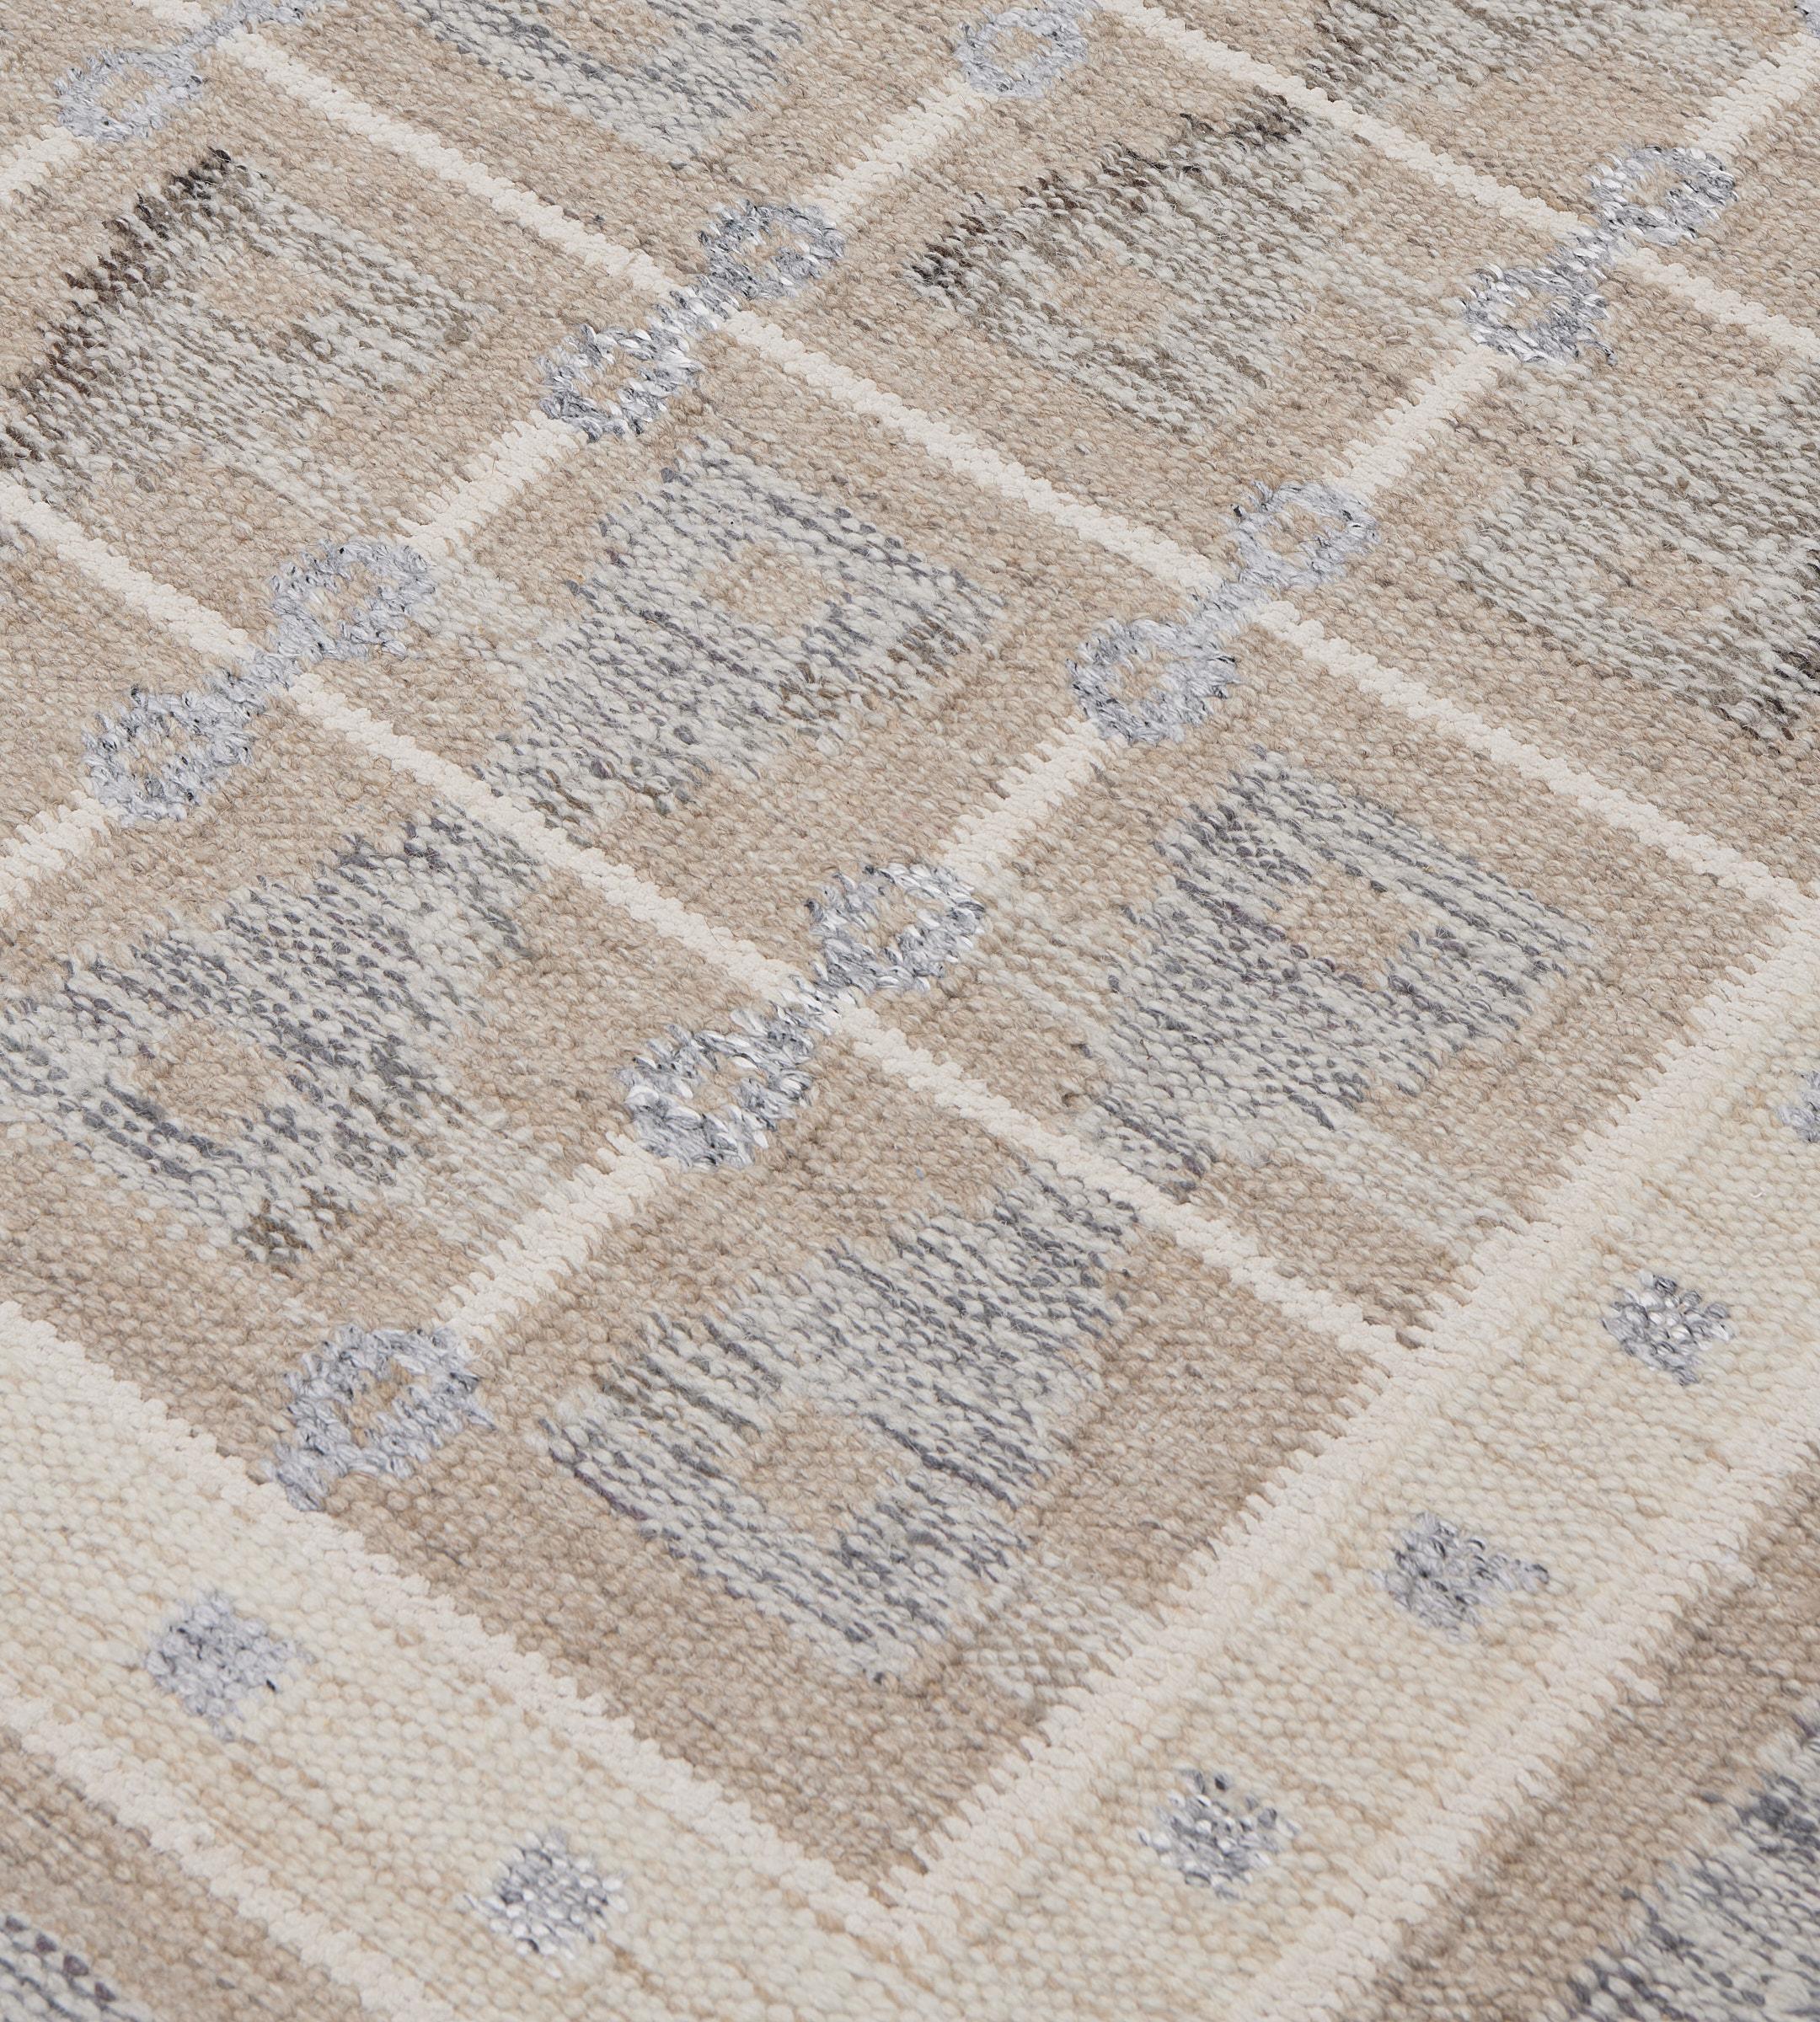 100% Wool Hand-Woven Geometric Beige Swedish-Inspired Flatweave Rug In New Condition For Sale In West Hollywood, CA